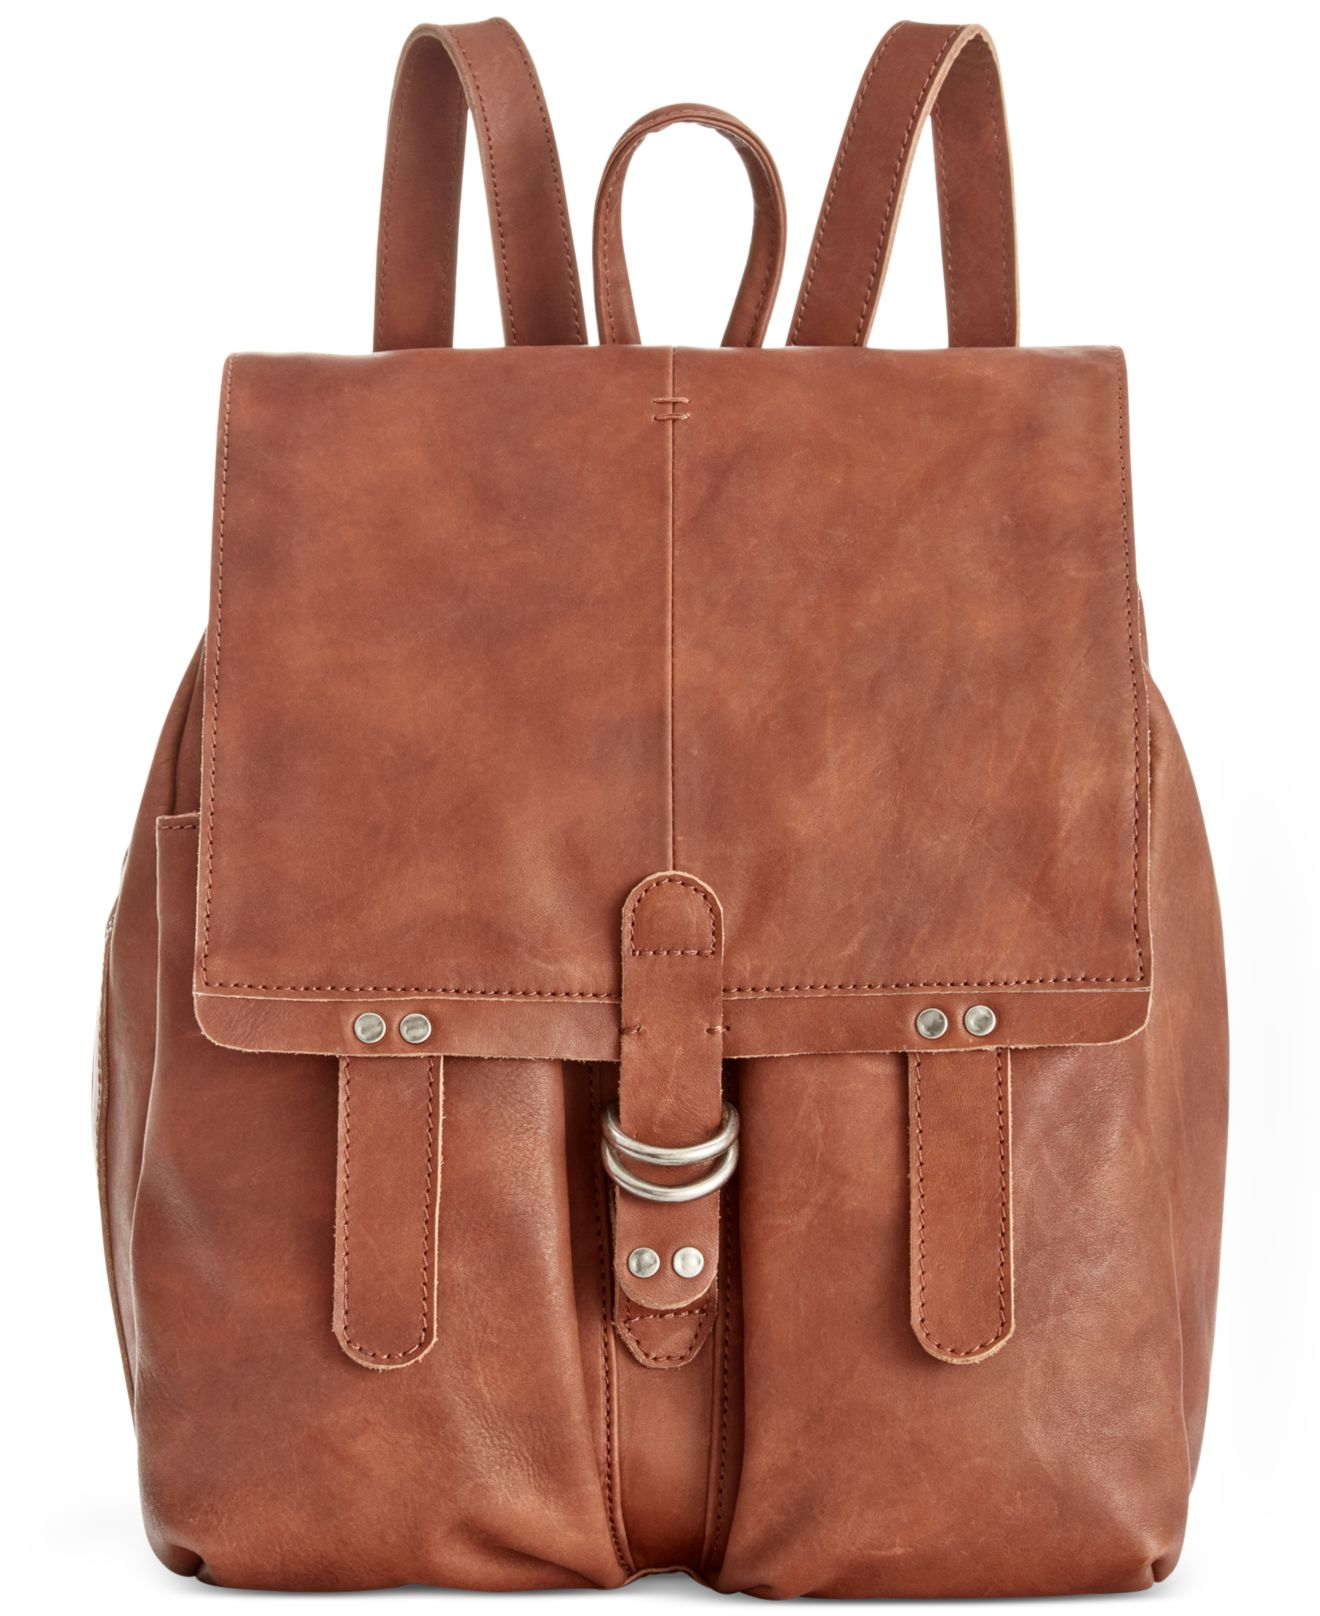 Lyst - Lucky Brand Dempsey Backpack in Brown